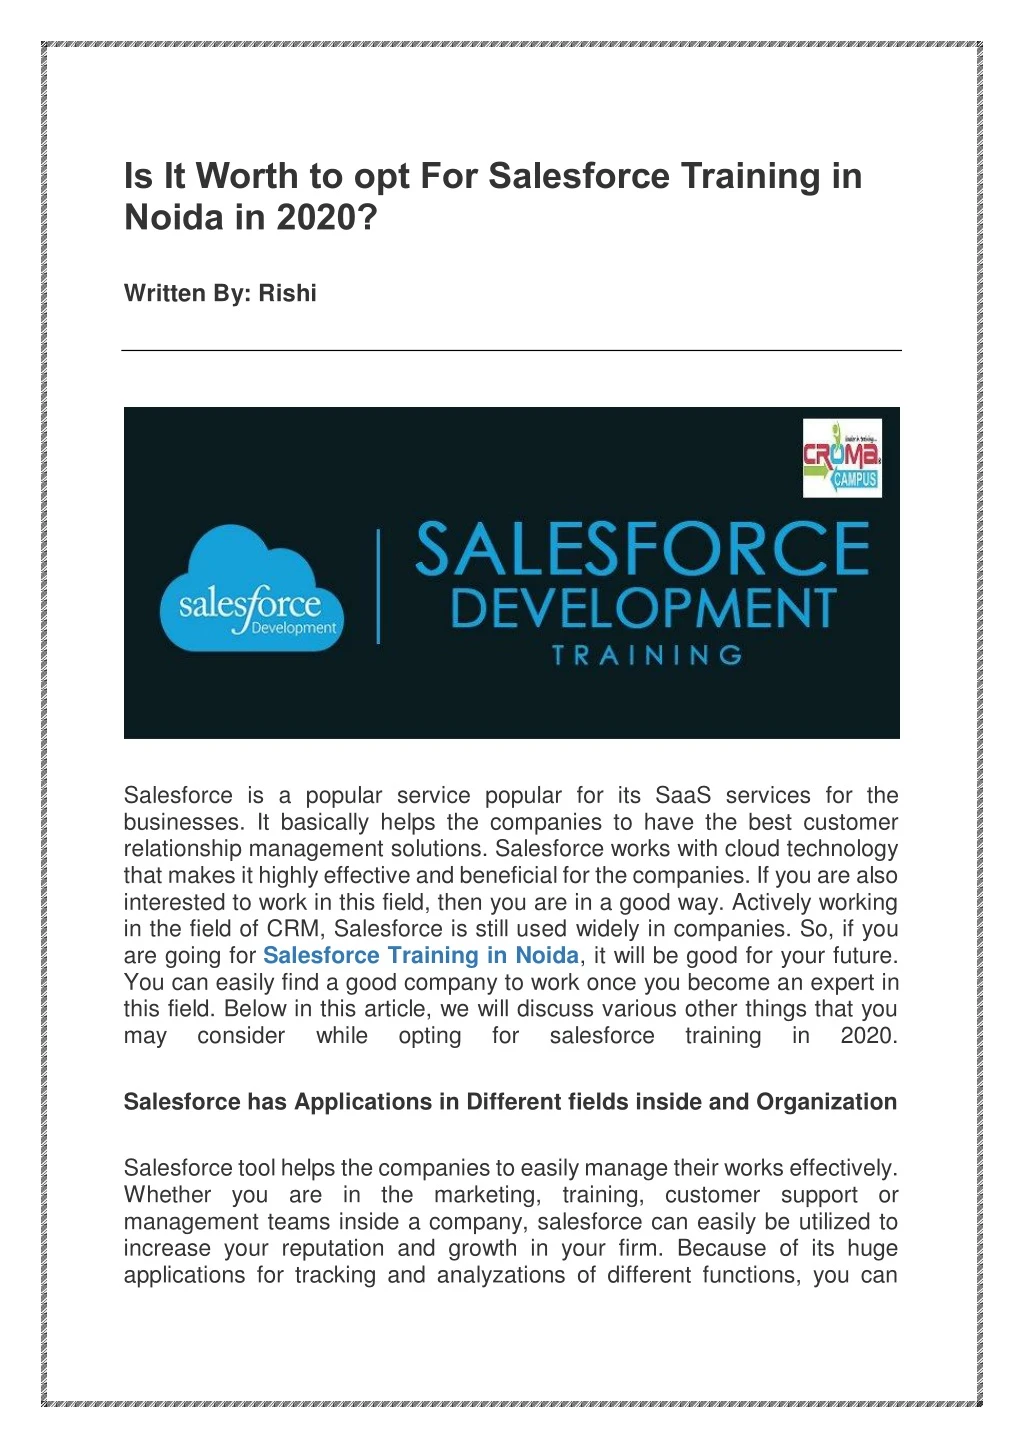 is it worth to opt for salesforce training